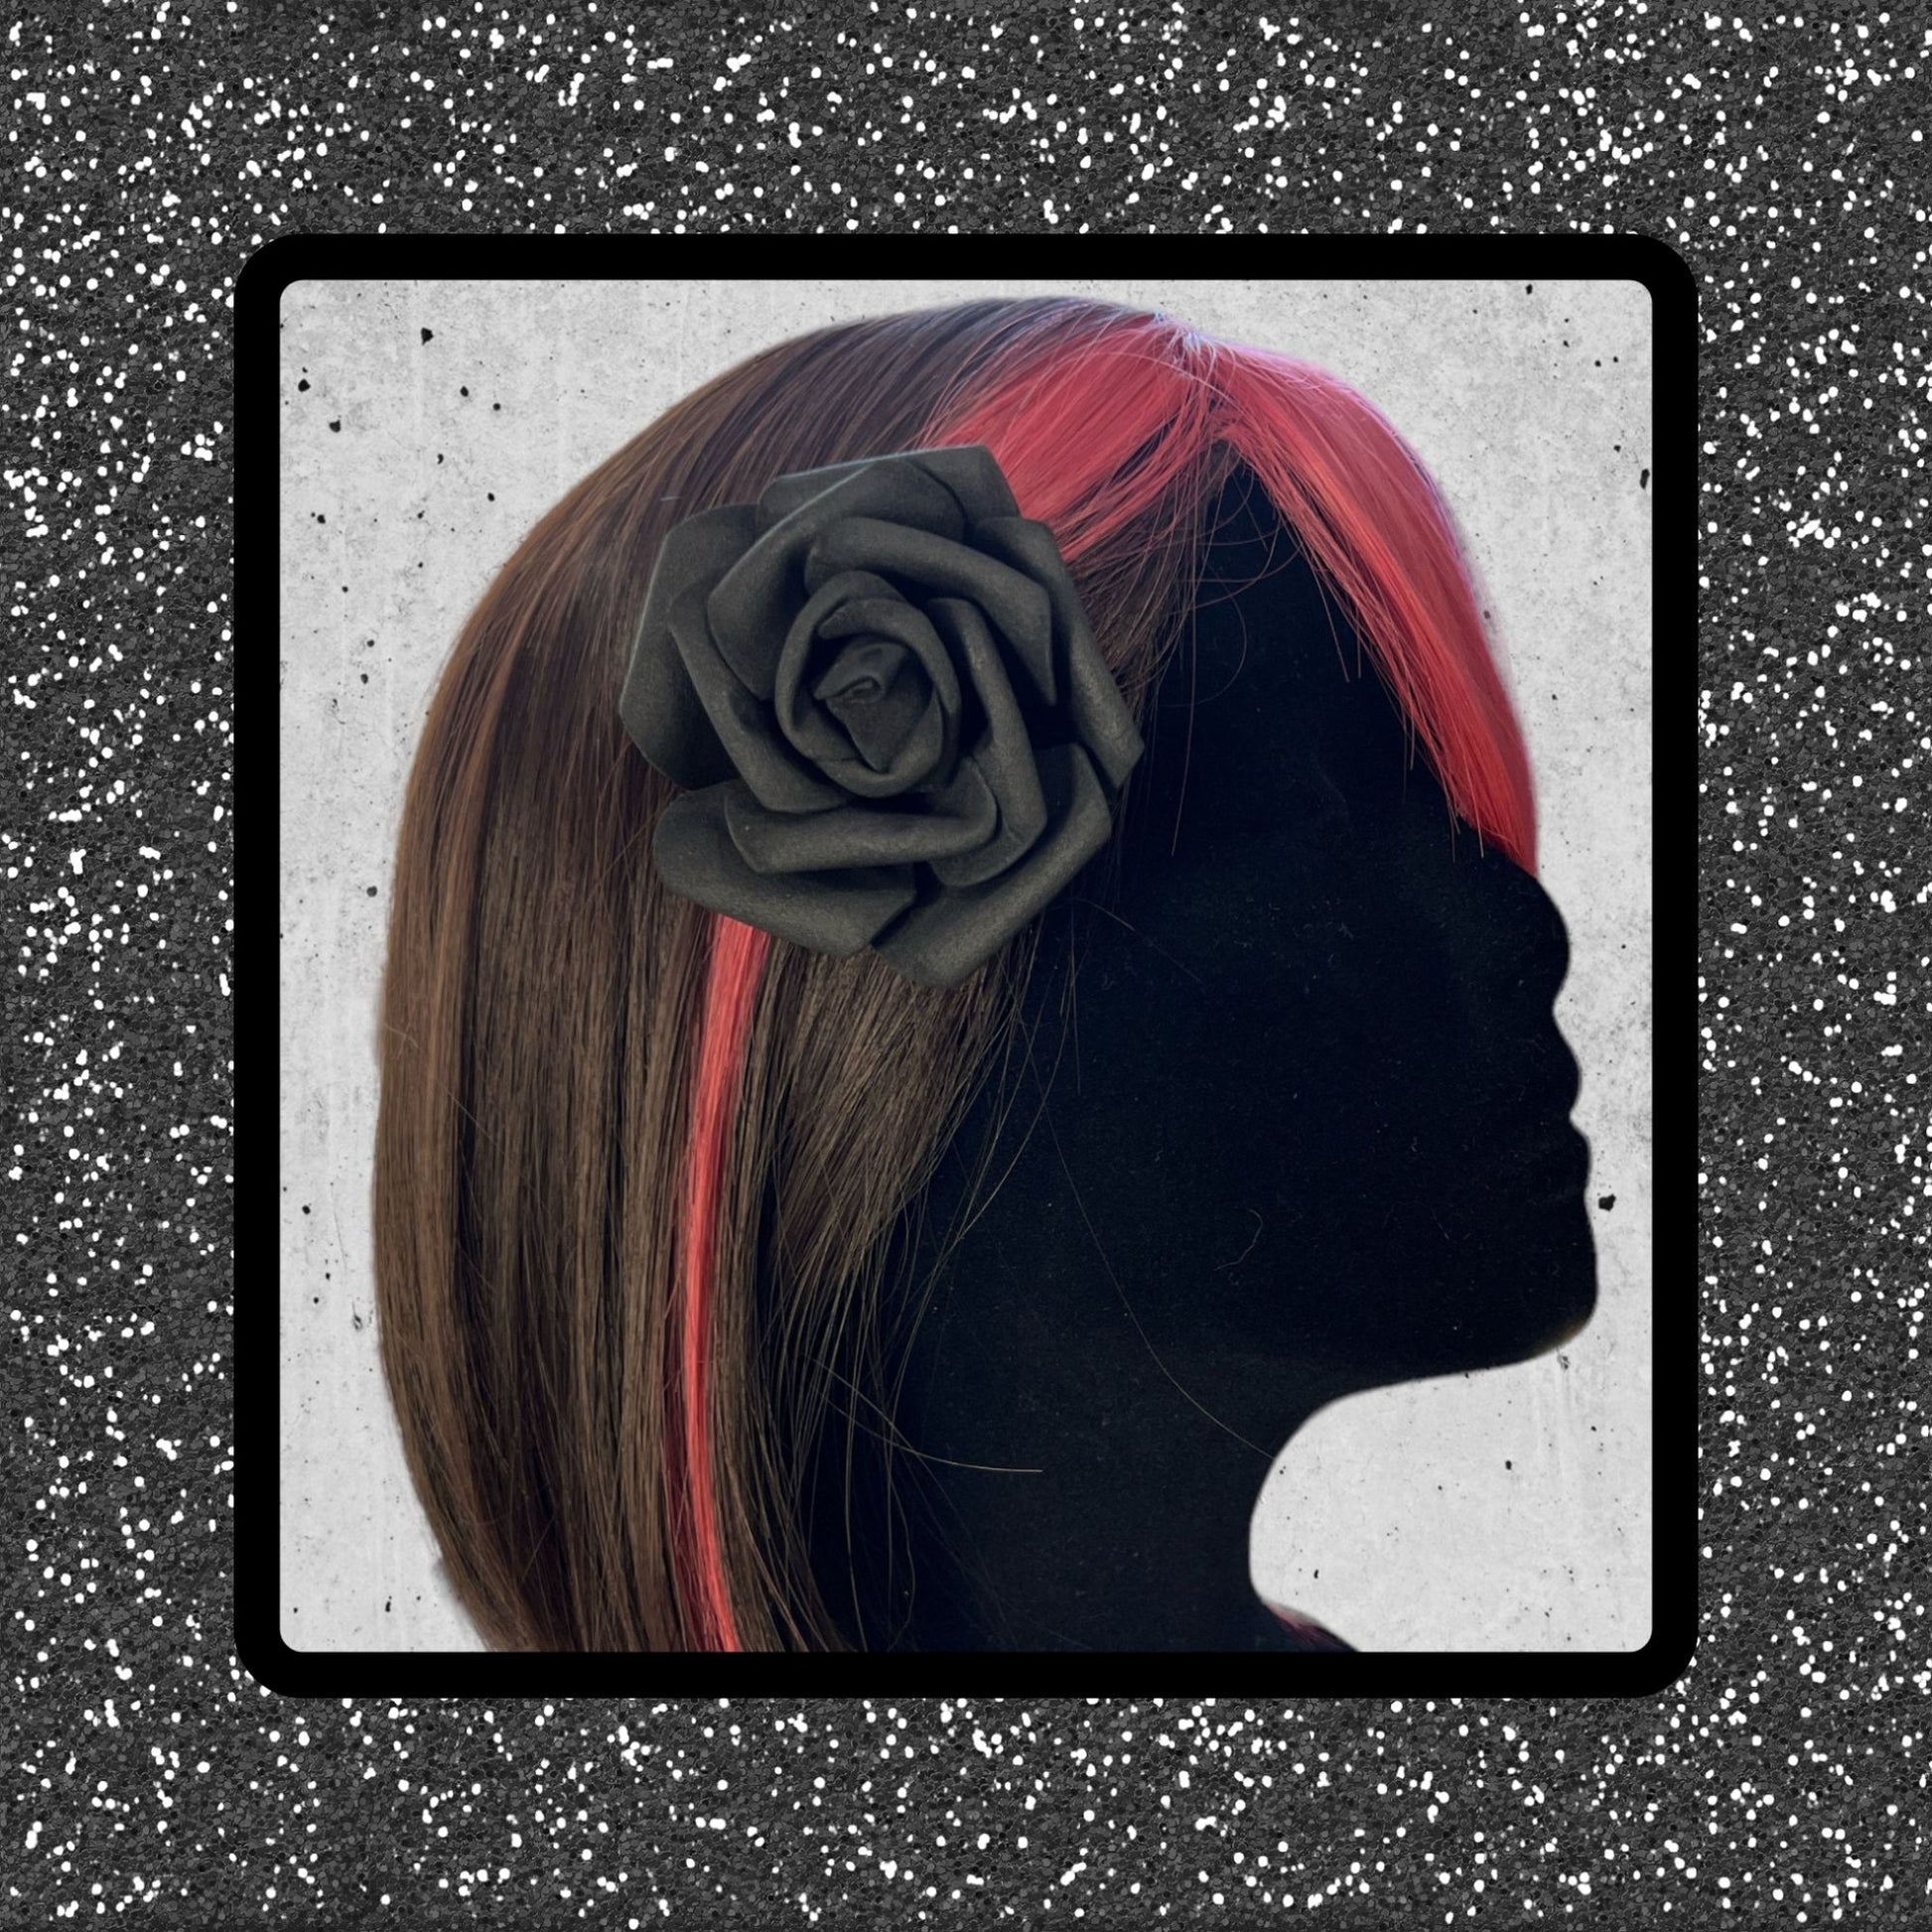 Oversized black rose hairpins by Extra Kitsch, perfect for gothic, romantic, and feminine styles. Lightweight foam for a comfortable and bold look. Displayed on a mannequin.